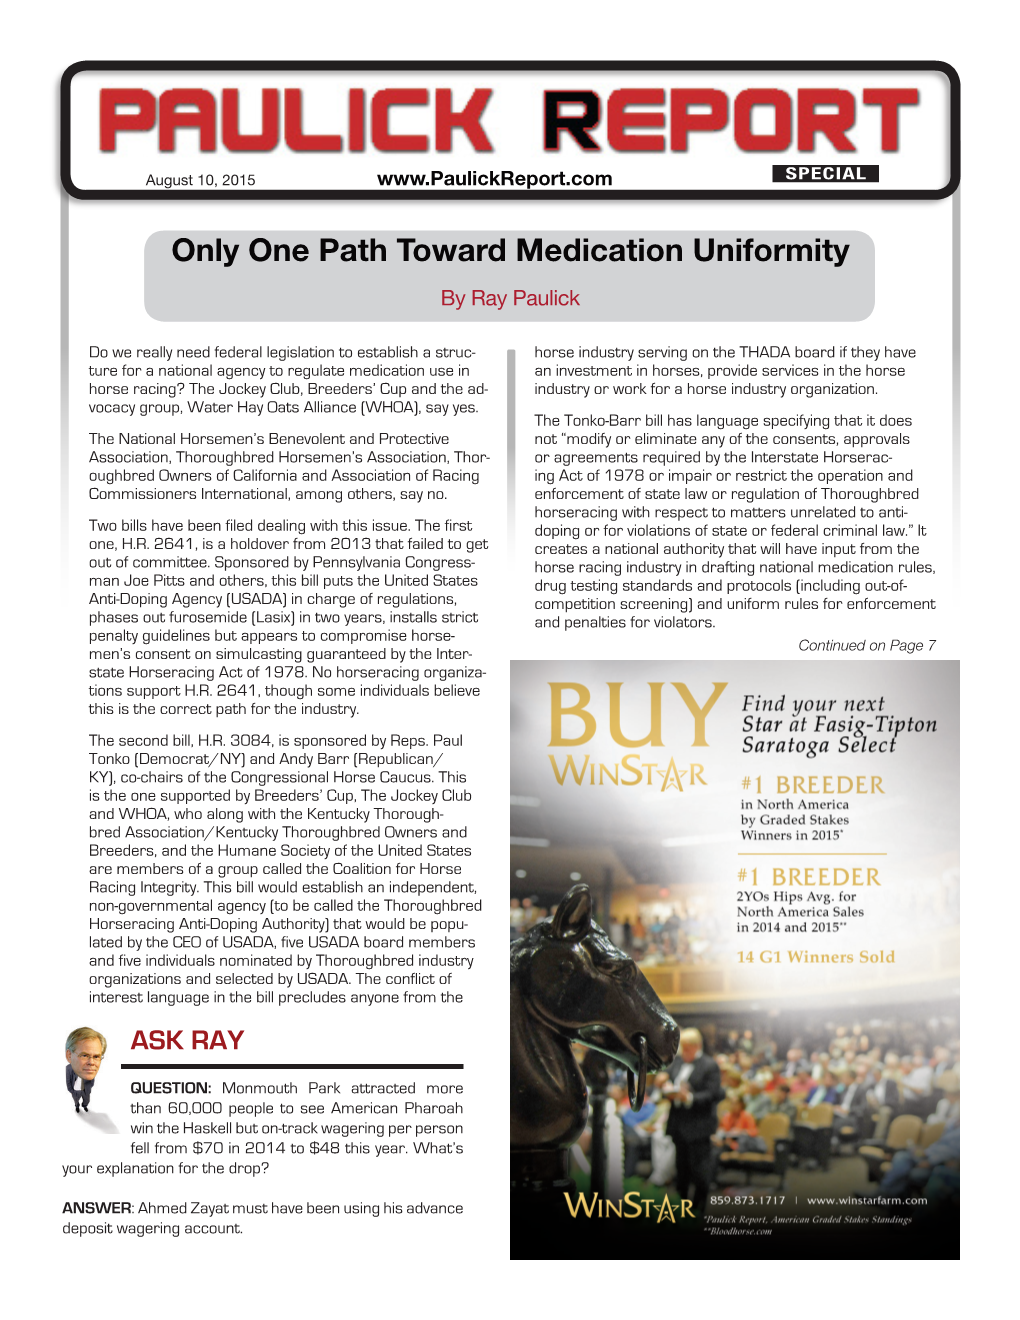 Only One Path Toward Medication Uniformity by Ray Paulick